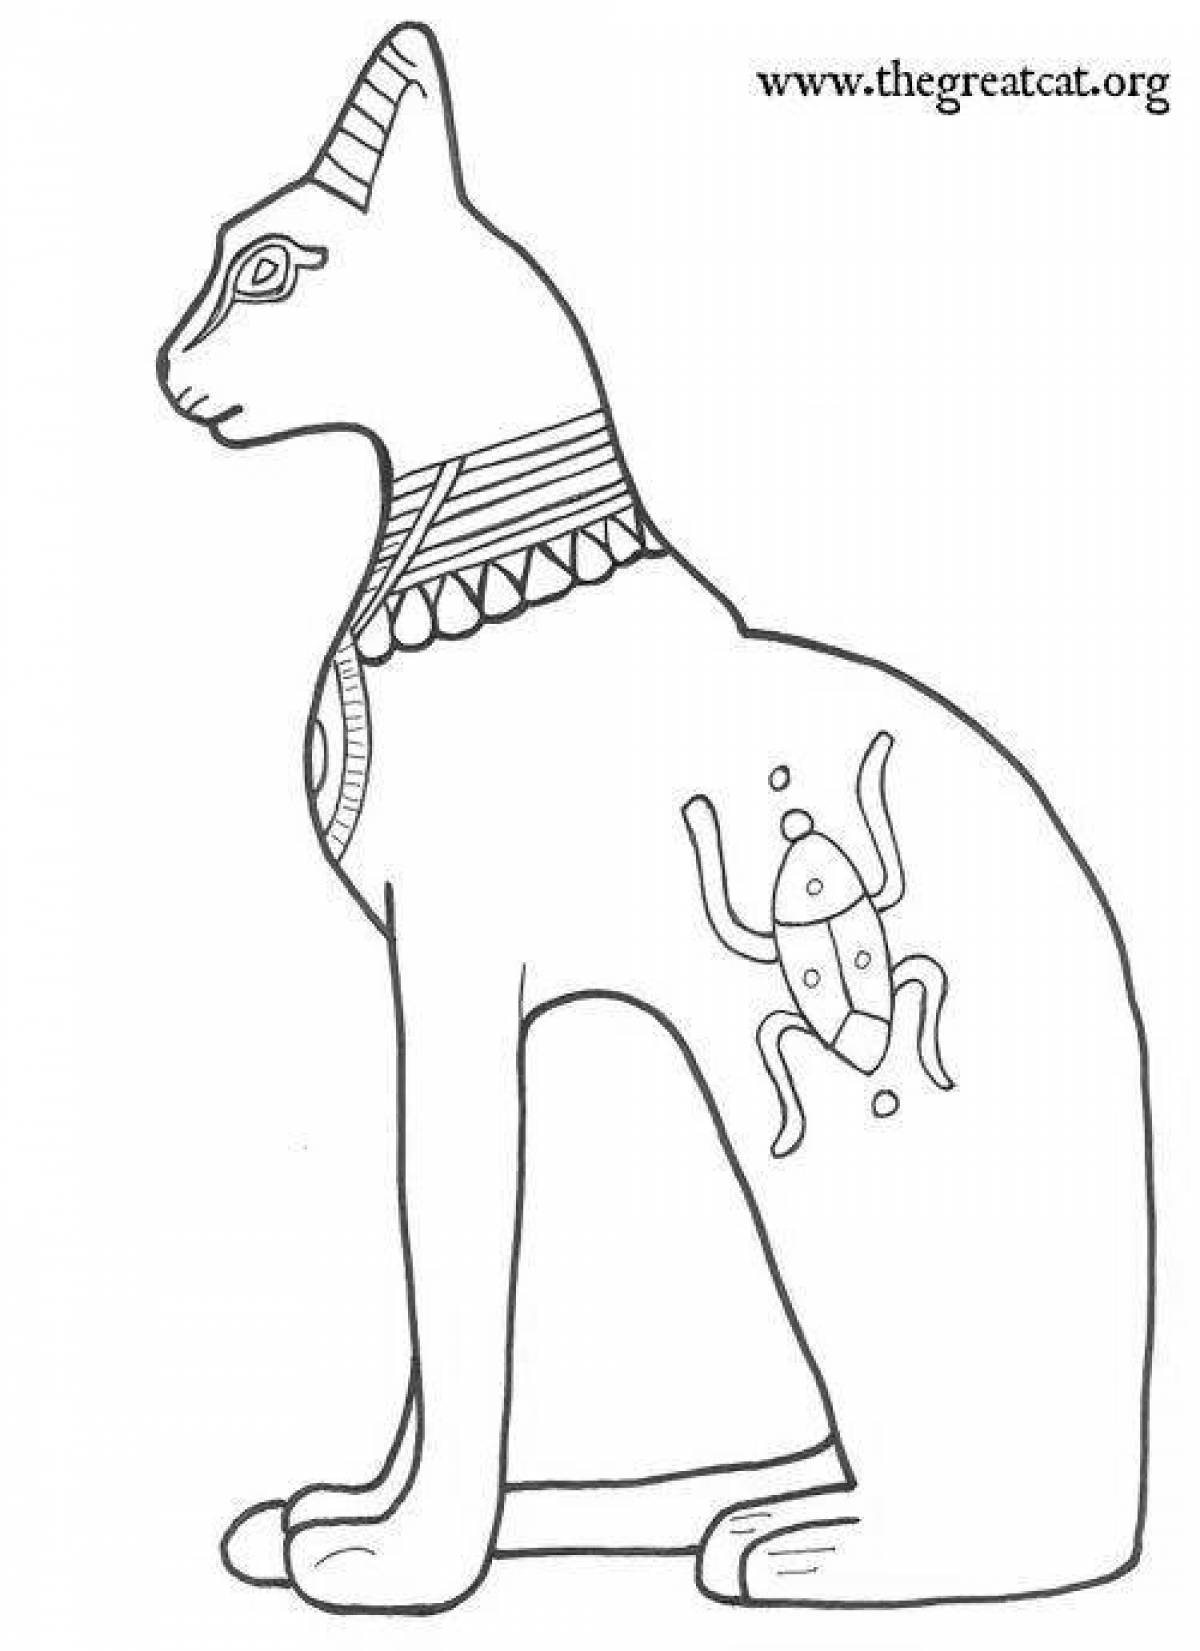 Cute Egyptian cat coloring page